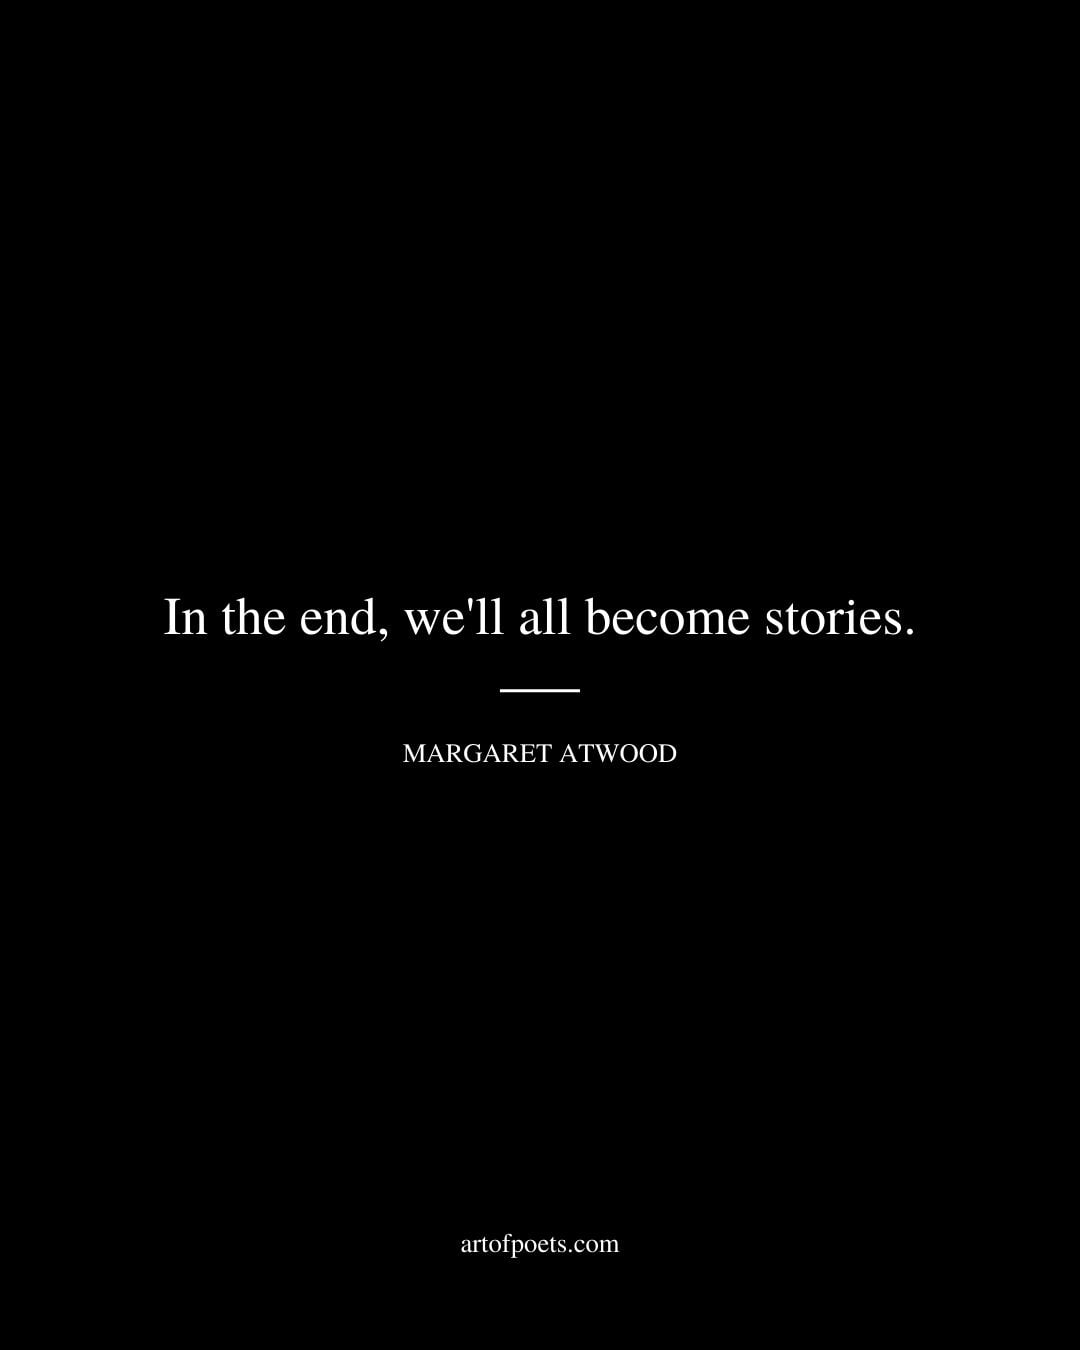 In the end well all become stories